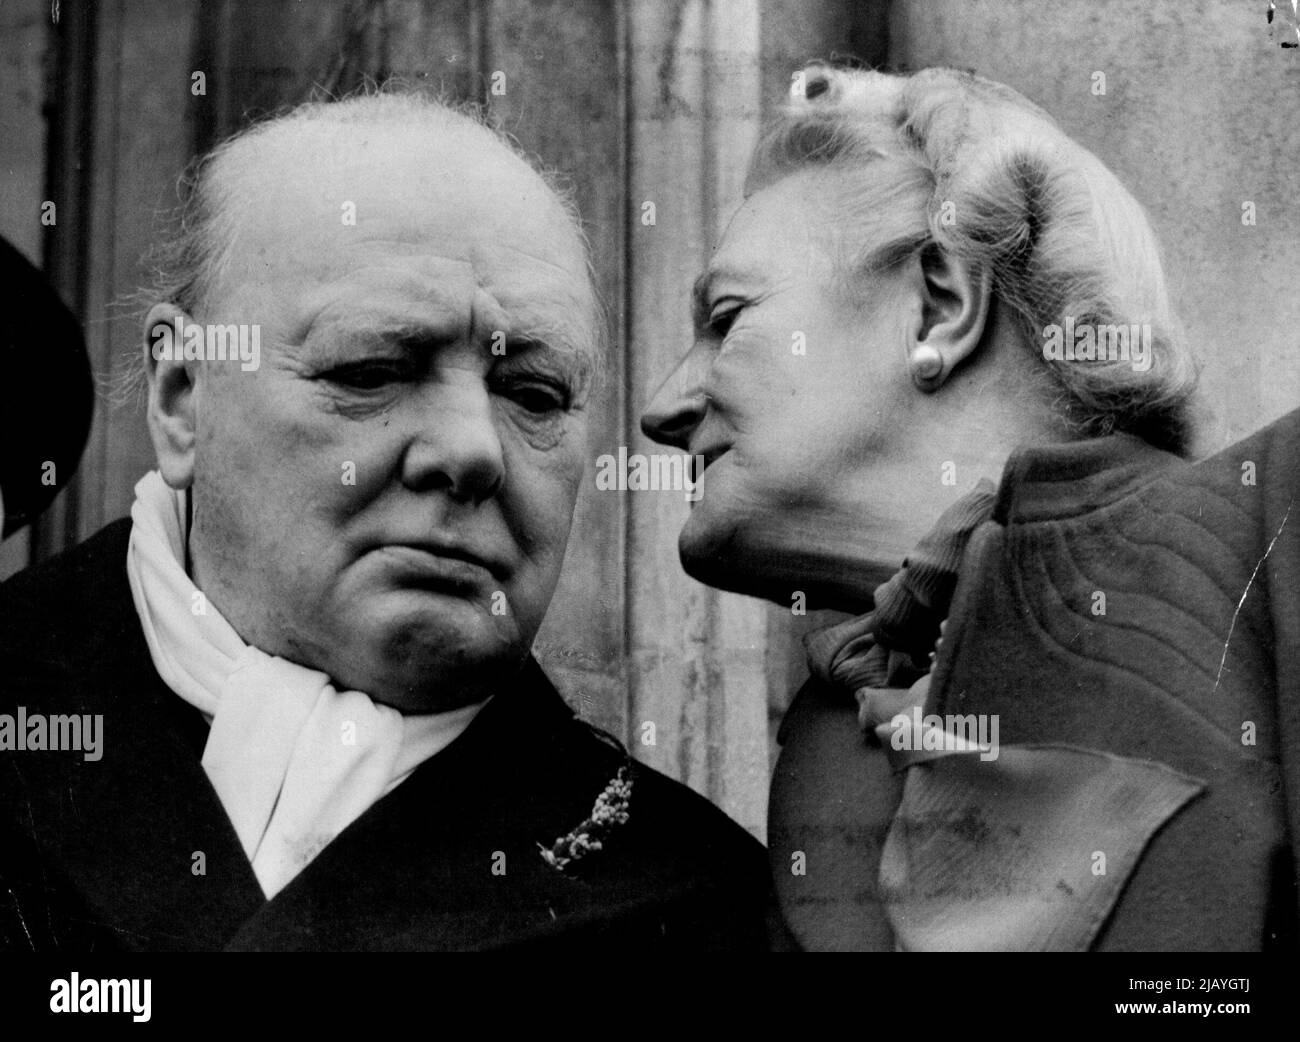 Winston Churchill and Lady Clementine - General Scenes Together 1950's. November 06, 1951. (Photo by The Associated Press Ltd.). Stock Photo